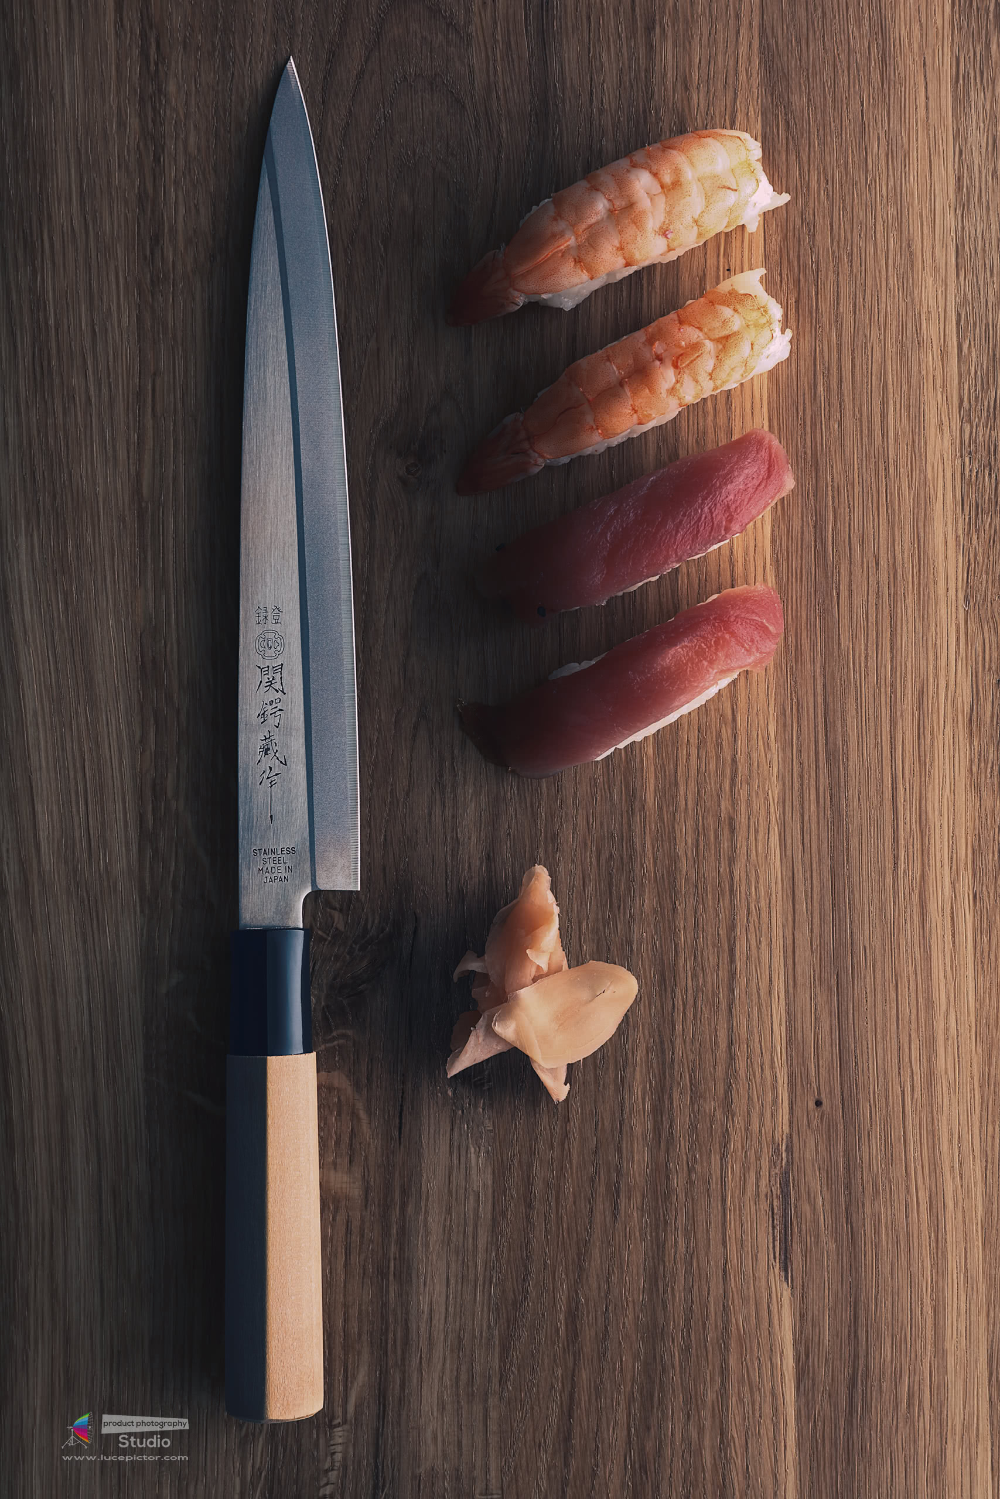 Yanagiba editorial and product photography. Photographing food, Food drink photography, Kitchen knives